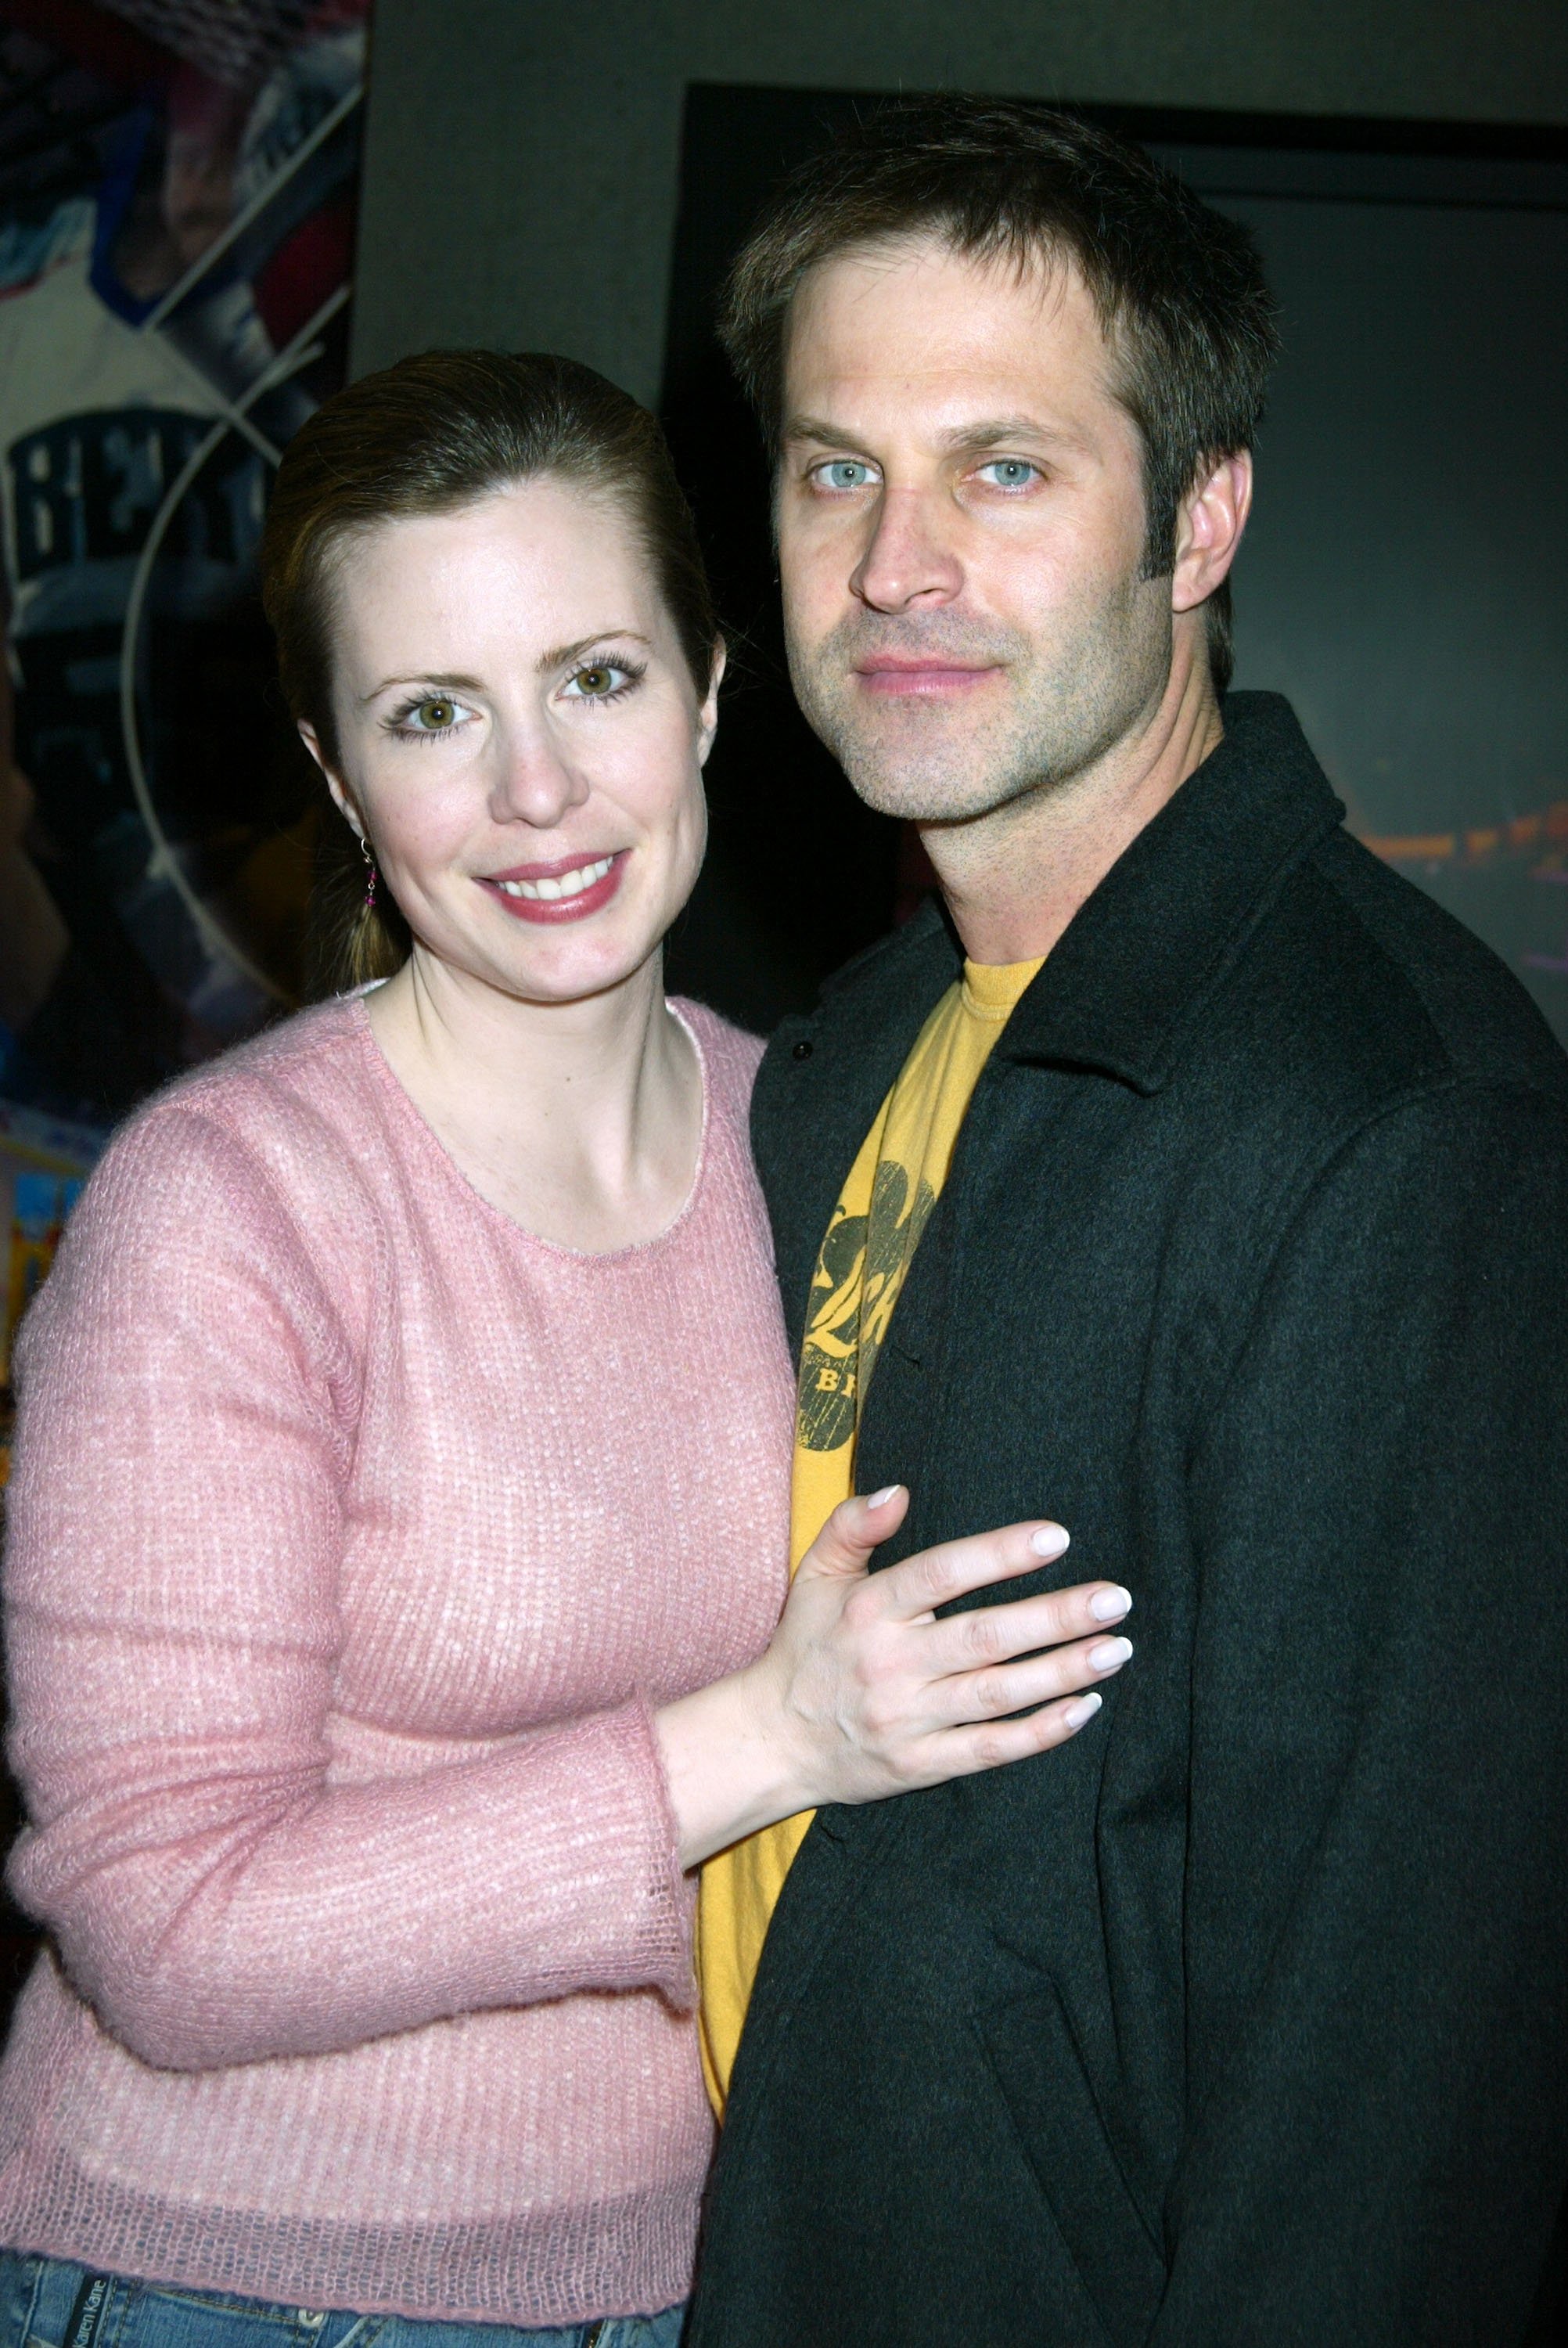 'As the World Turns' actor Martha Byrne in a pink blouse, and Jon Hensley in a yellow shirt and black jacket.